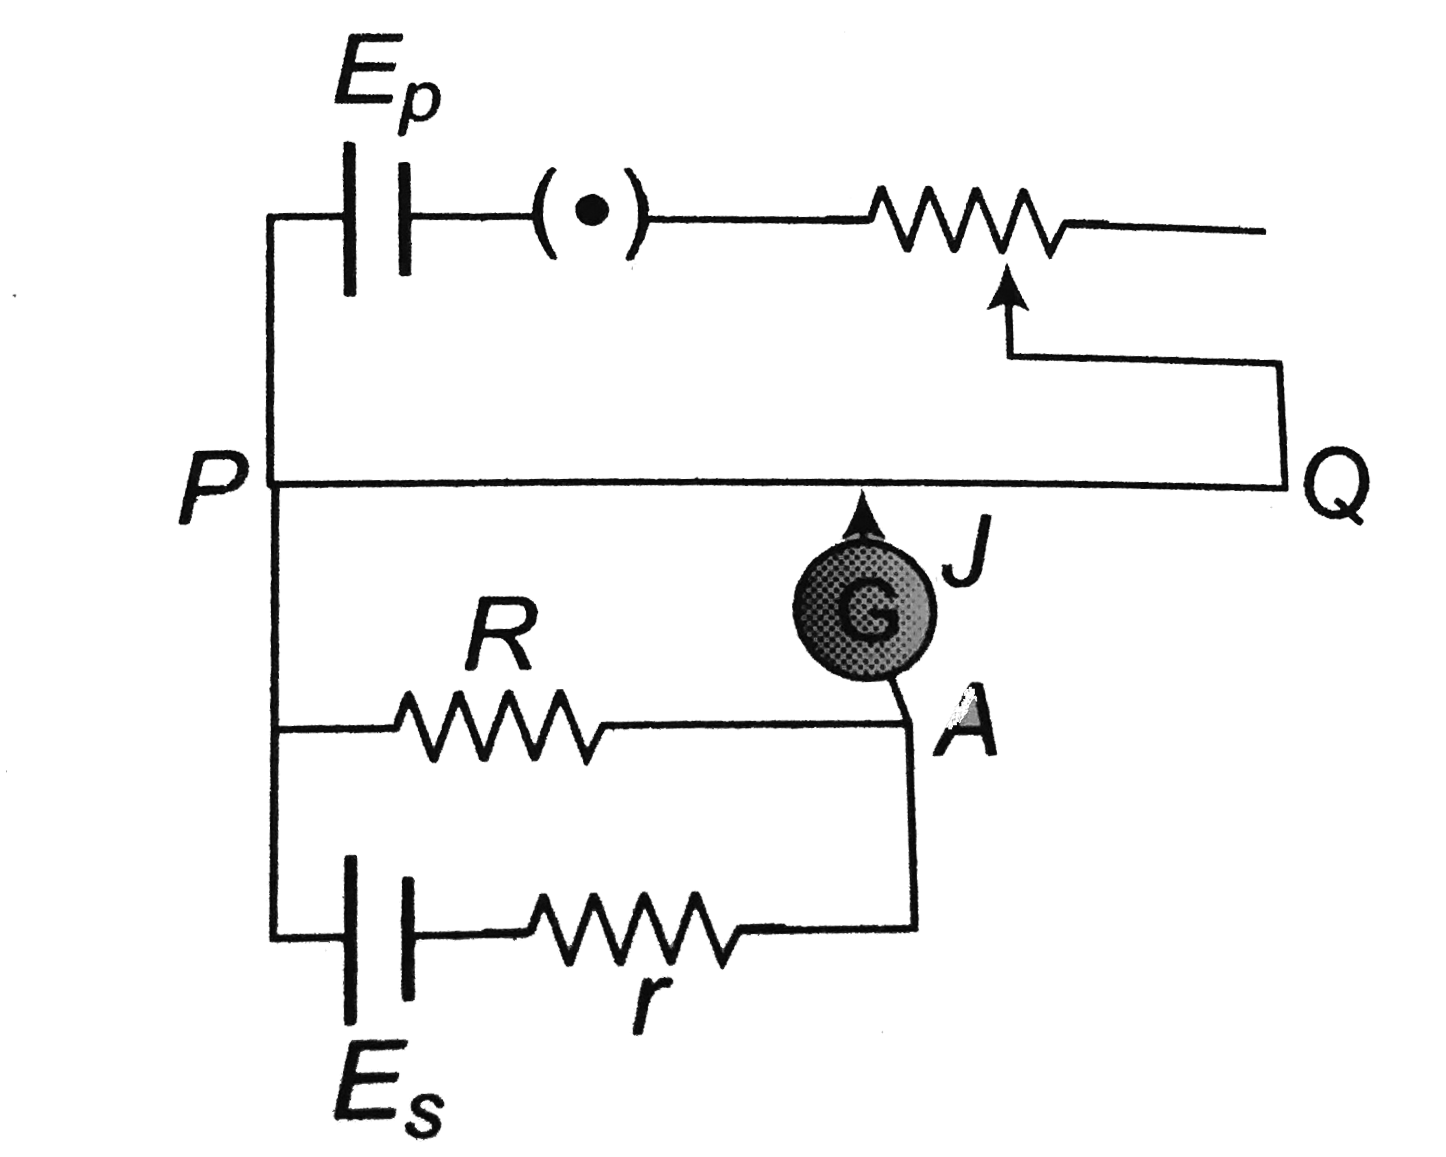 One of the circuits for the measurement of resistance by potentiometer is shown. The galvanometer is connected at point A and zero deflection is observed is observed at length PJ = 30 cm. In second case the secondary cell is changed.      Take E(s) = 10 V and r = 1 Omega in 1^(st) reading and E(s) = 5 V and r = 2 Omega in 2^(nd) reading. In second case, the zero deflection is observed at length PJ = 10 cm. What is the resistance R (in ohm)?